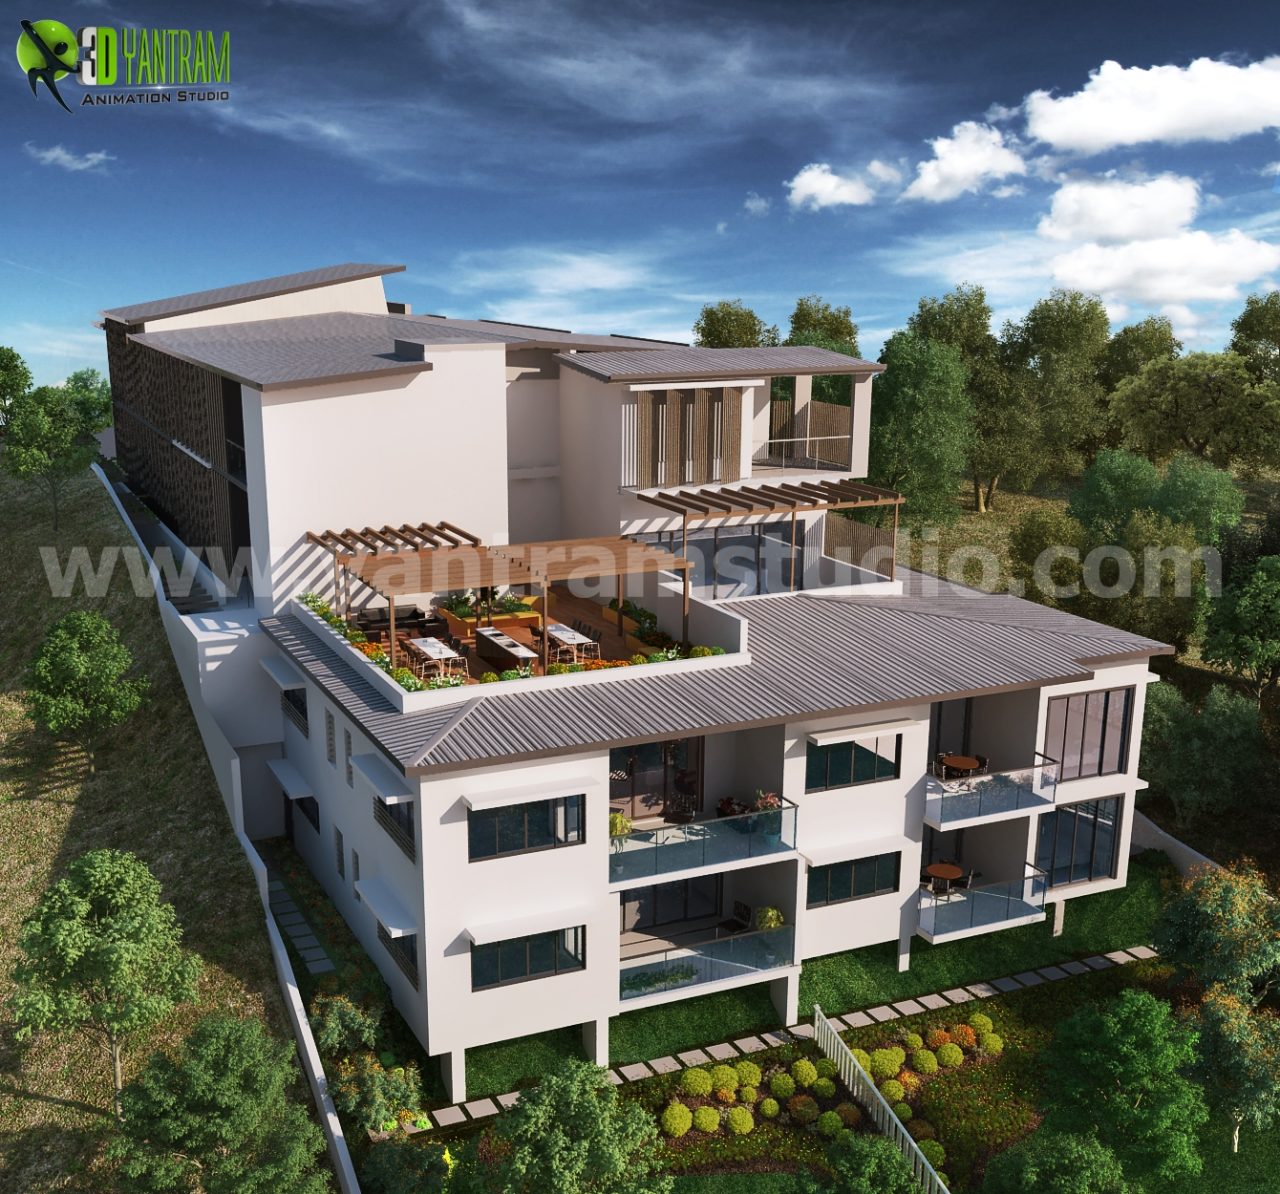 Up-hill Exterior House Design Ideas  by Yantram 3d architectural rendering – Milan, Italy